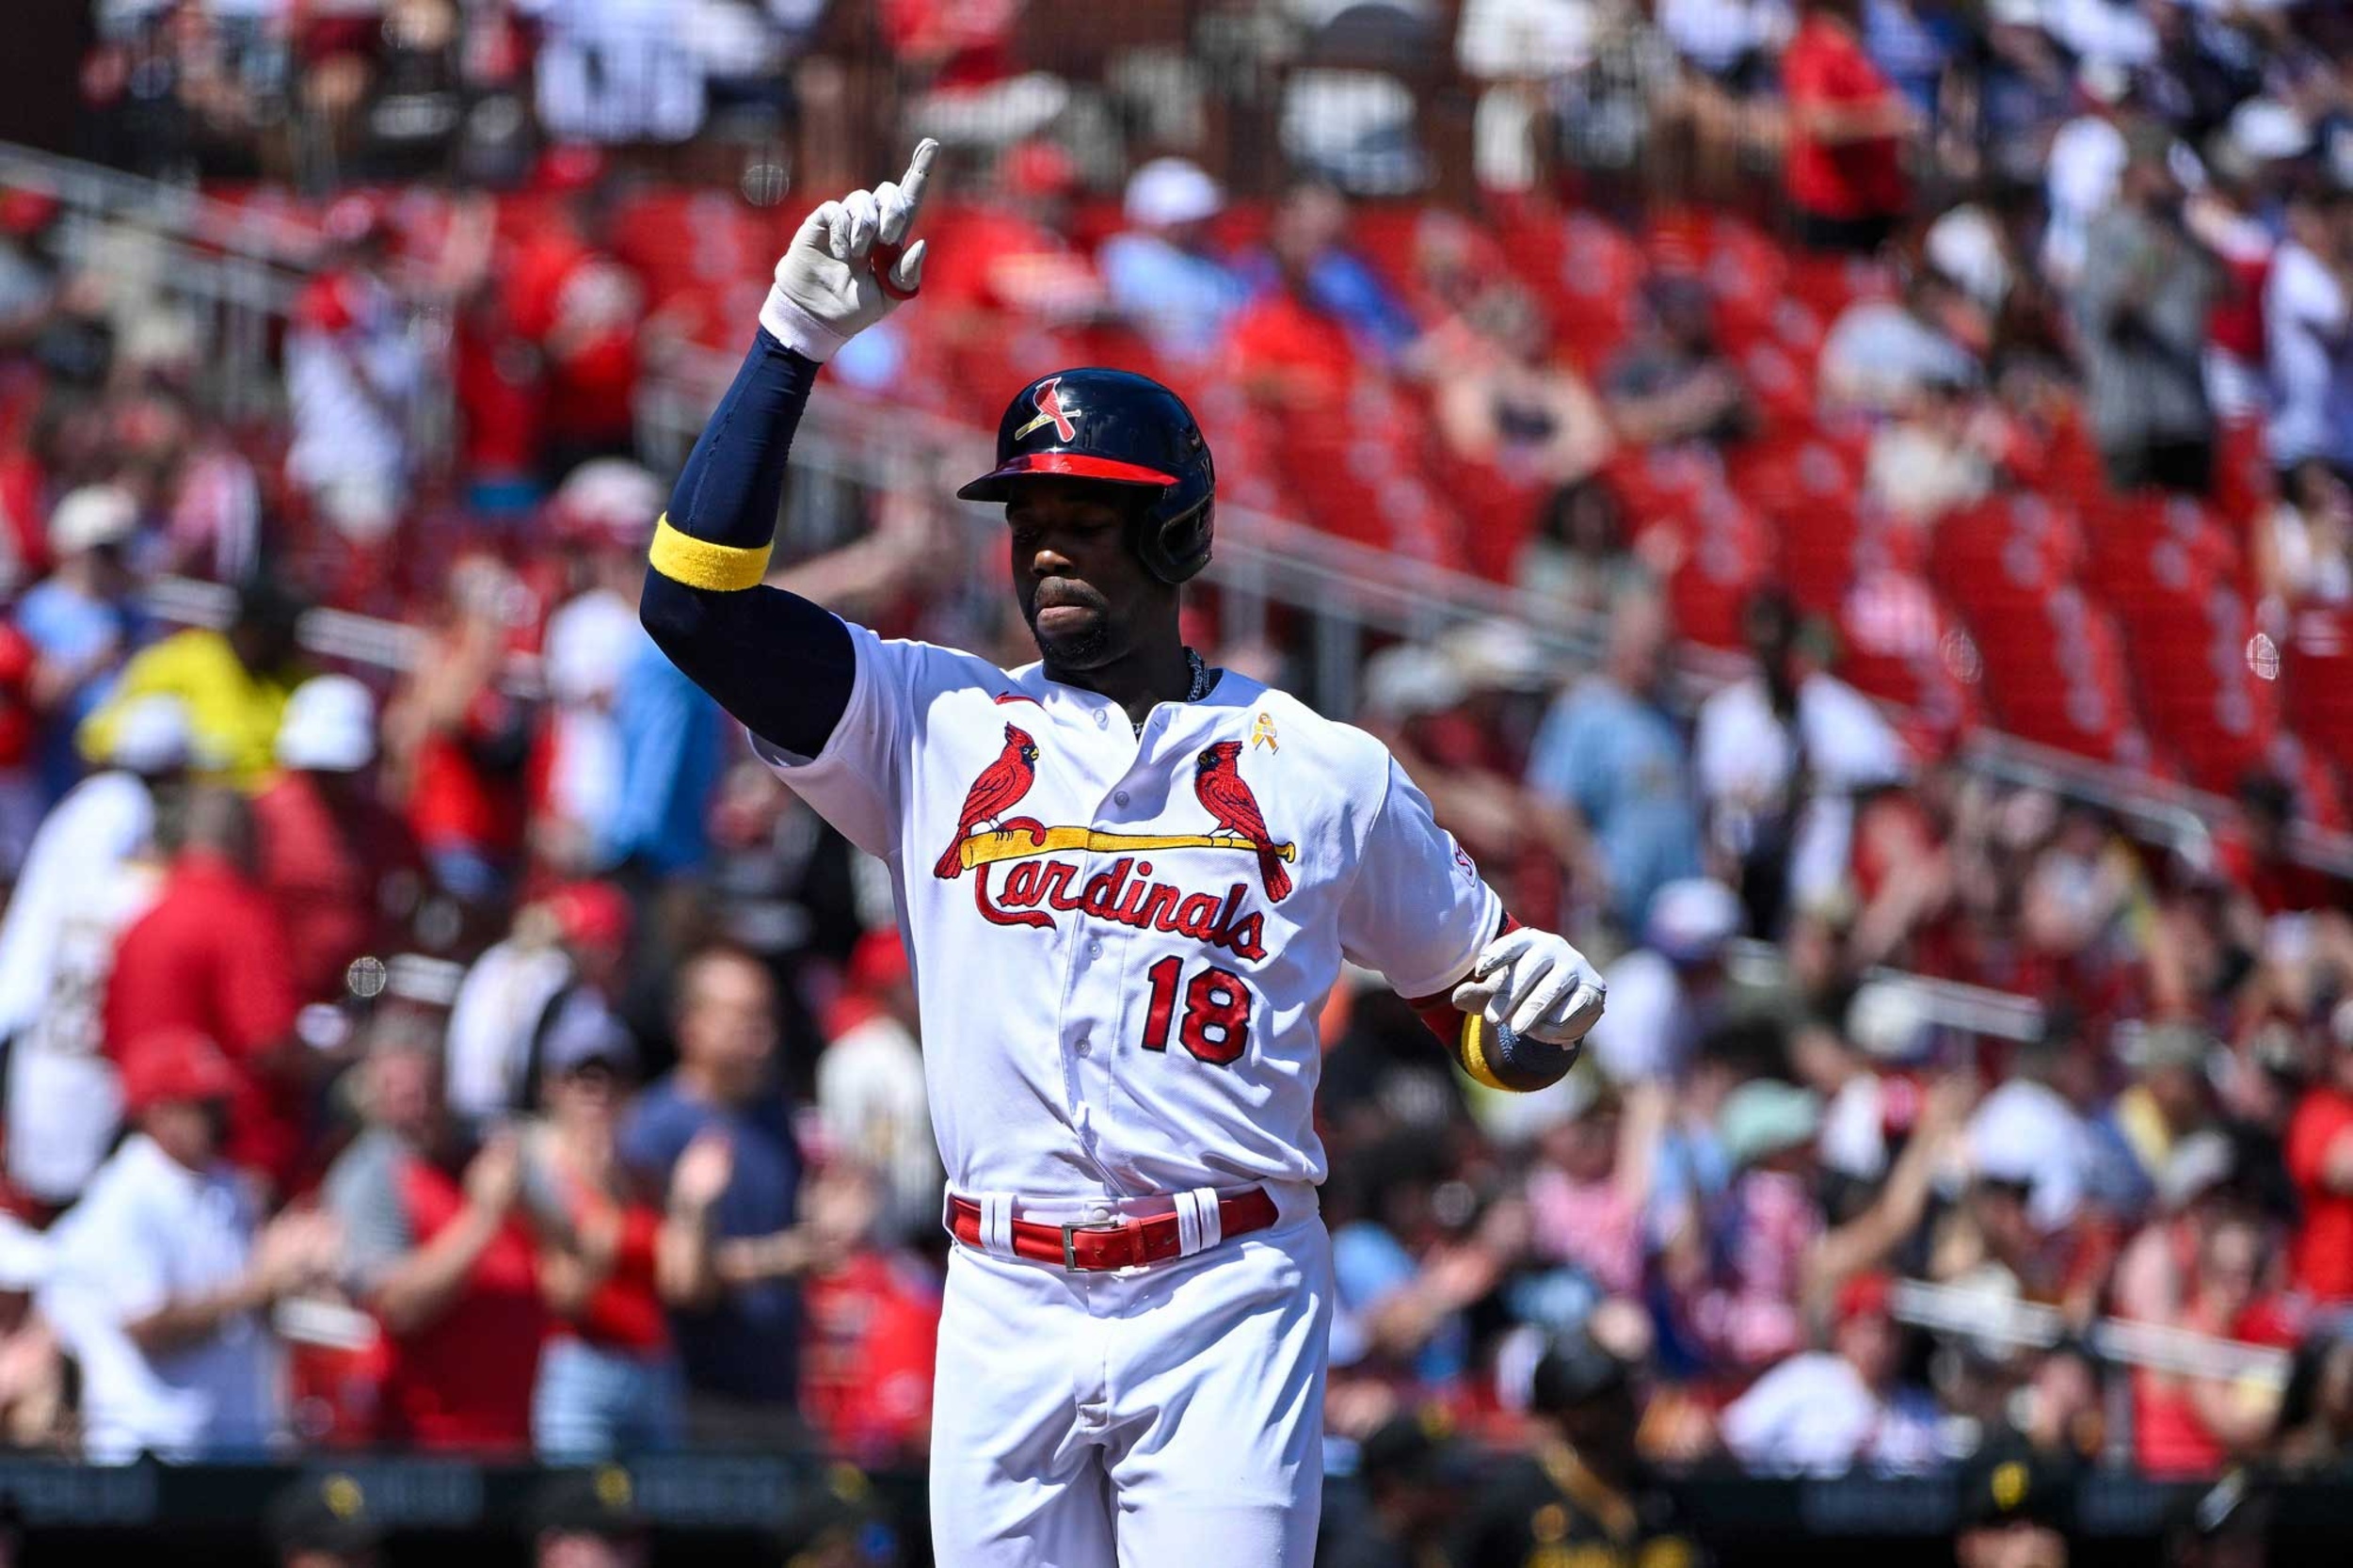 <p>The Cardinals top prospect, Walker's bat came around after a demotion last season to hit .276-16-51 in 465 plate appearances. The team hopes his defense can do the same, as he struggled mightily in right field after shifting from the infield. Walker's bat could also play a huge role for the NL Central favorites.</p><p><a href='https://www.msn.com/en-us/community/channel/vid-cj9pqbr0vn9in2b6ddcd8sfgpfq6x6utp44fssrv6mc2gtybw0us'>Follow us on MSN to see more of our exclusive MLB content.</a></p>